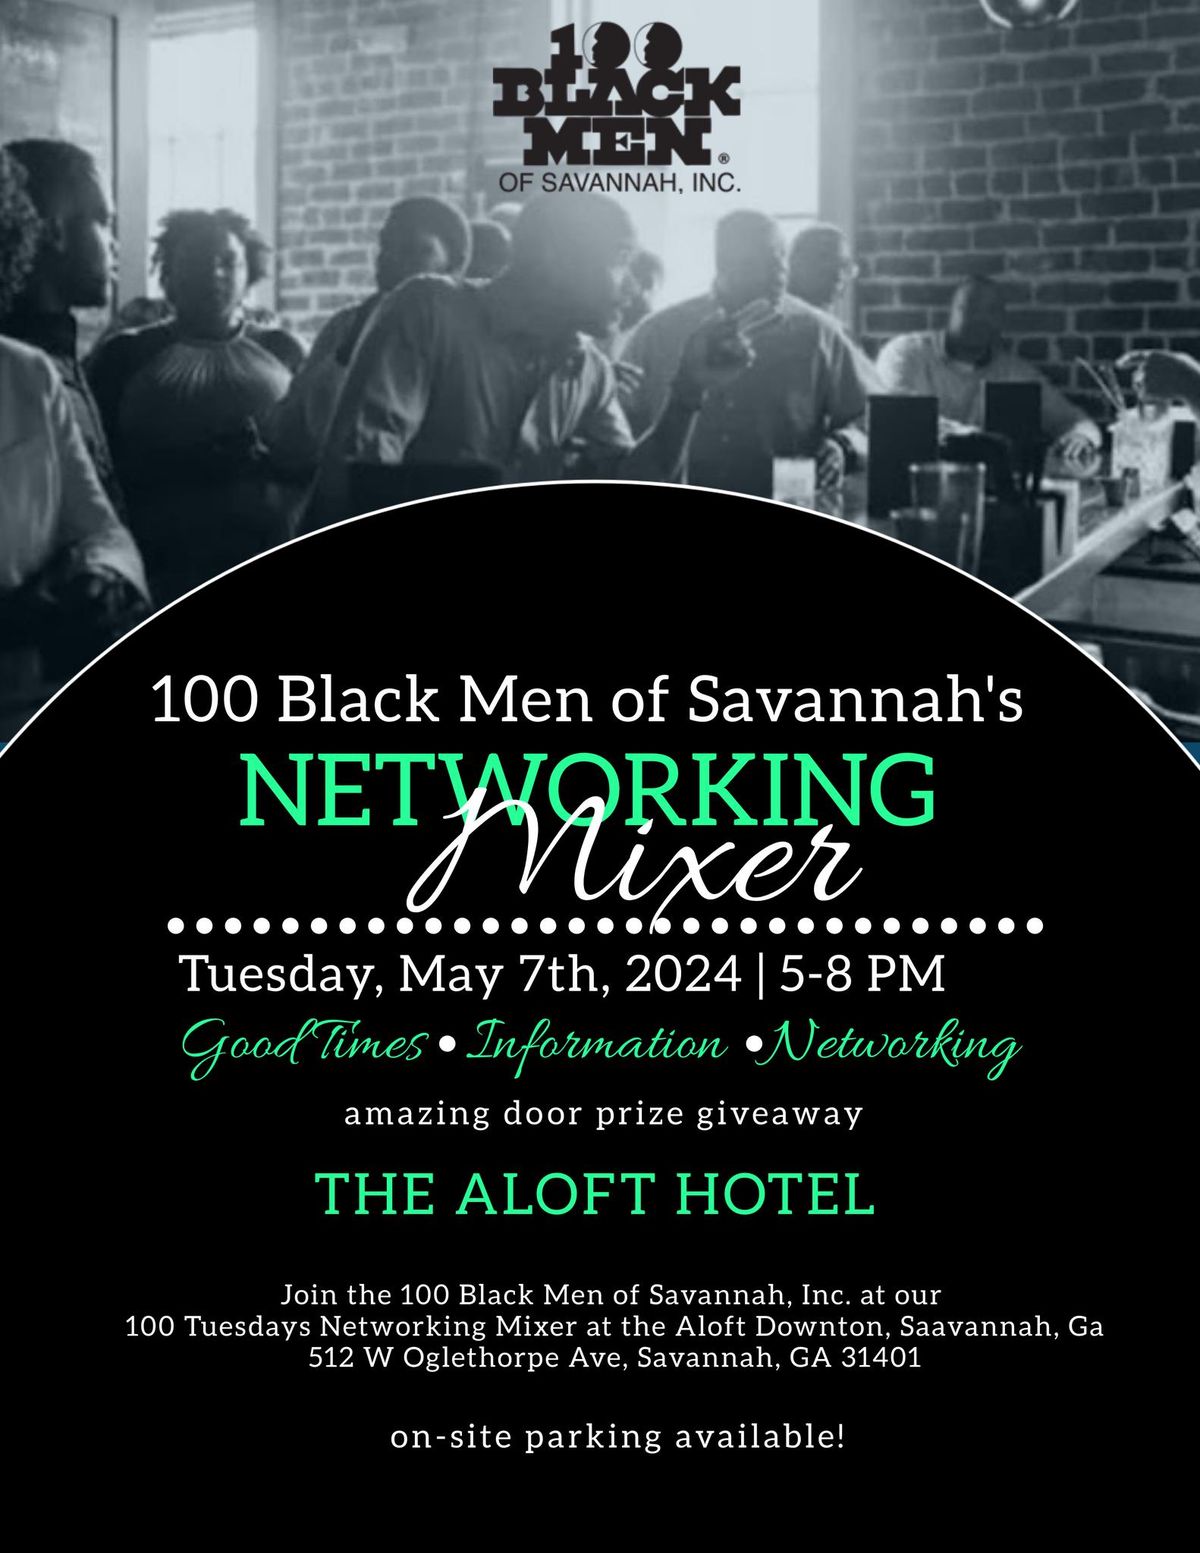 May 7th First Tuesdays @ the Aloft Hotel - Networking with the 100